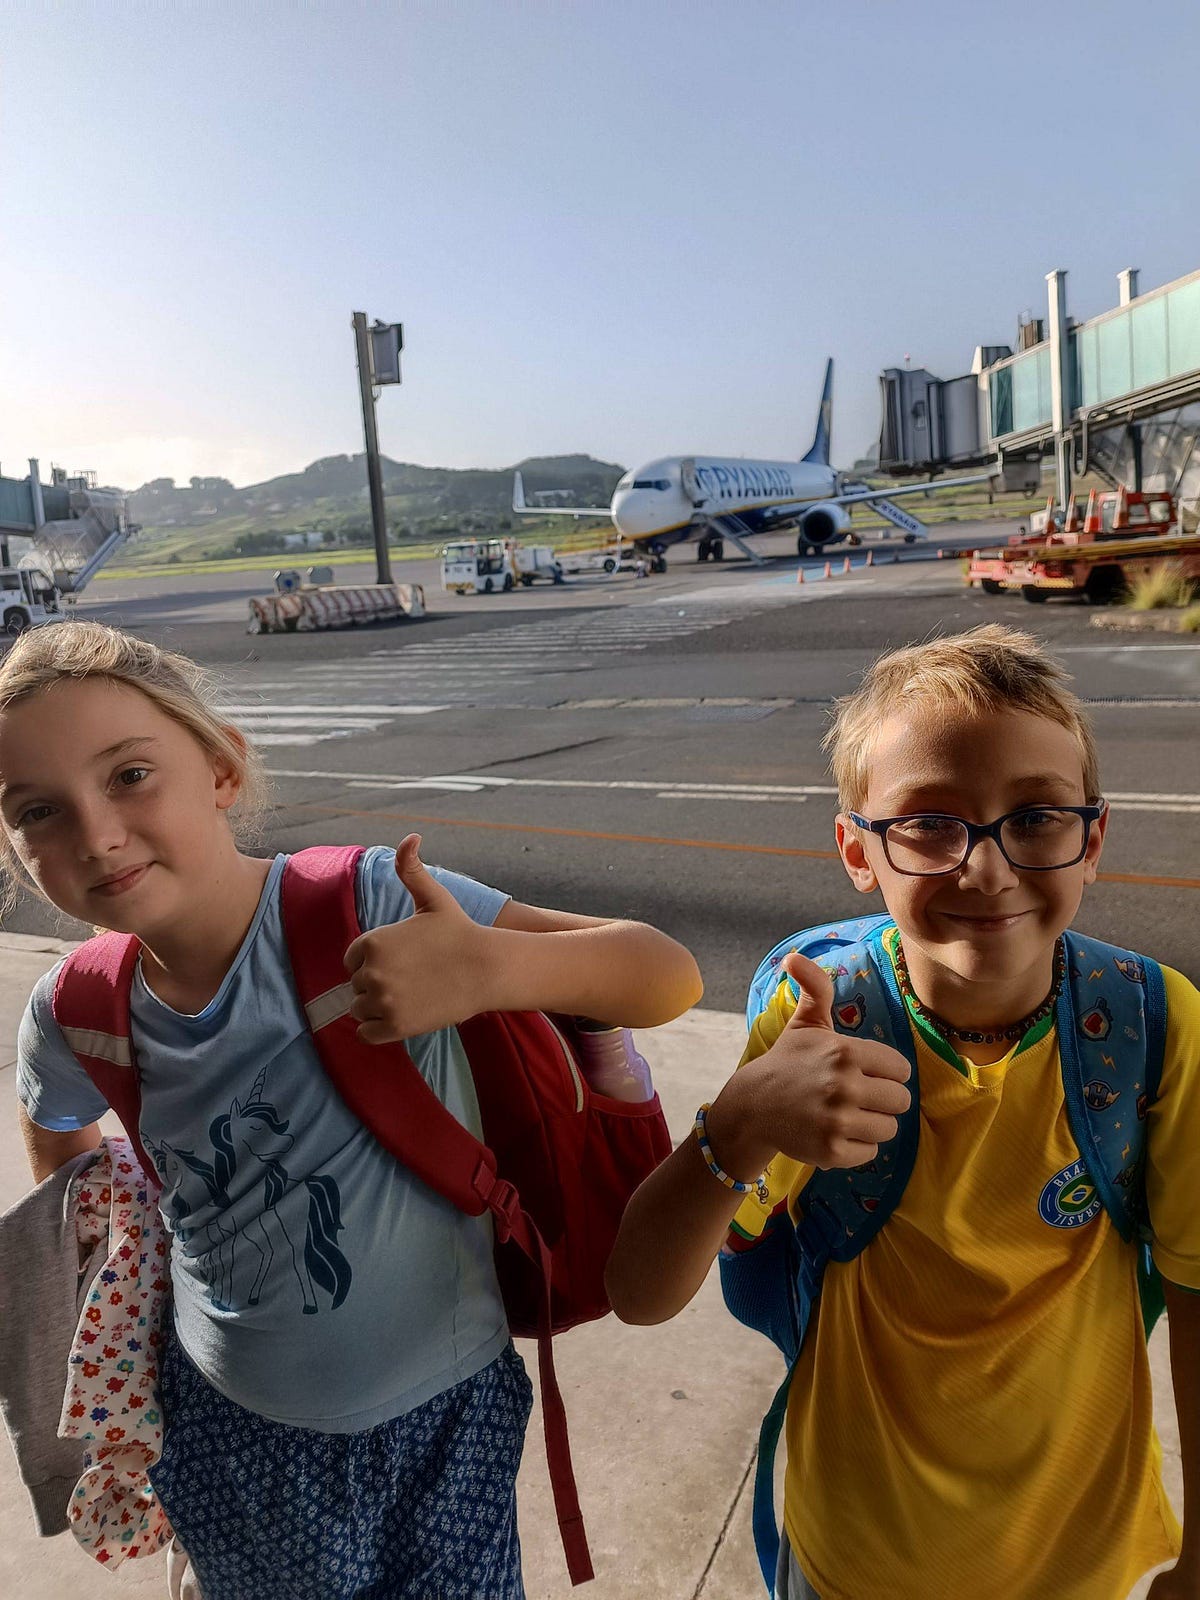 Travel Safety With Kids: Essential Travel Safety Tips For Families